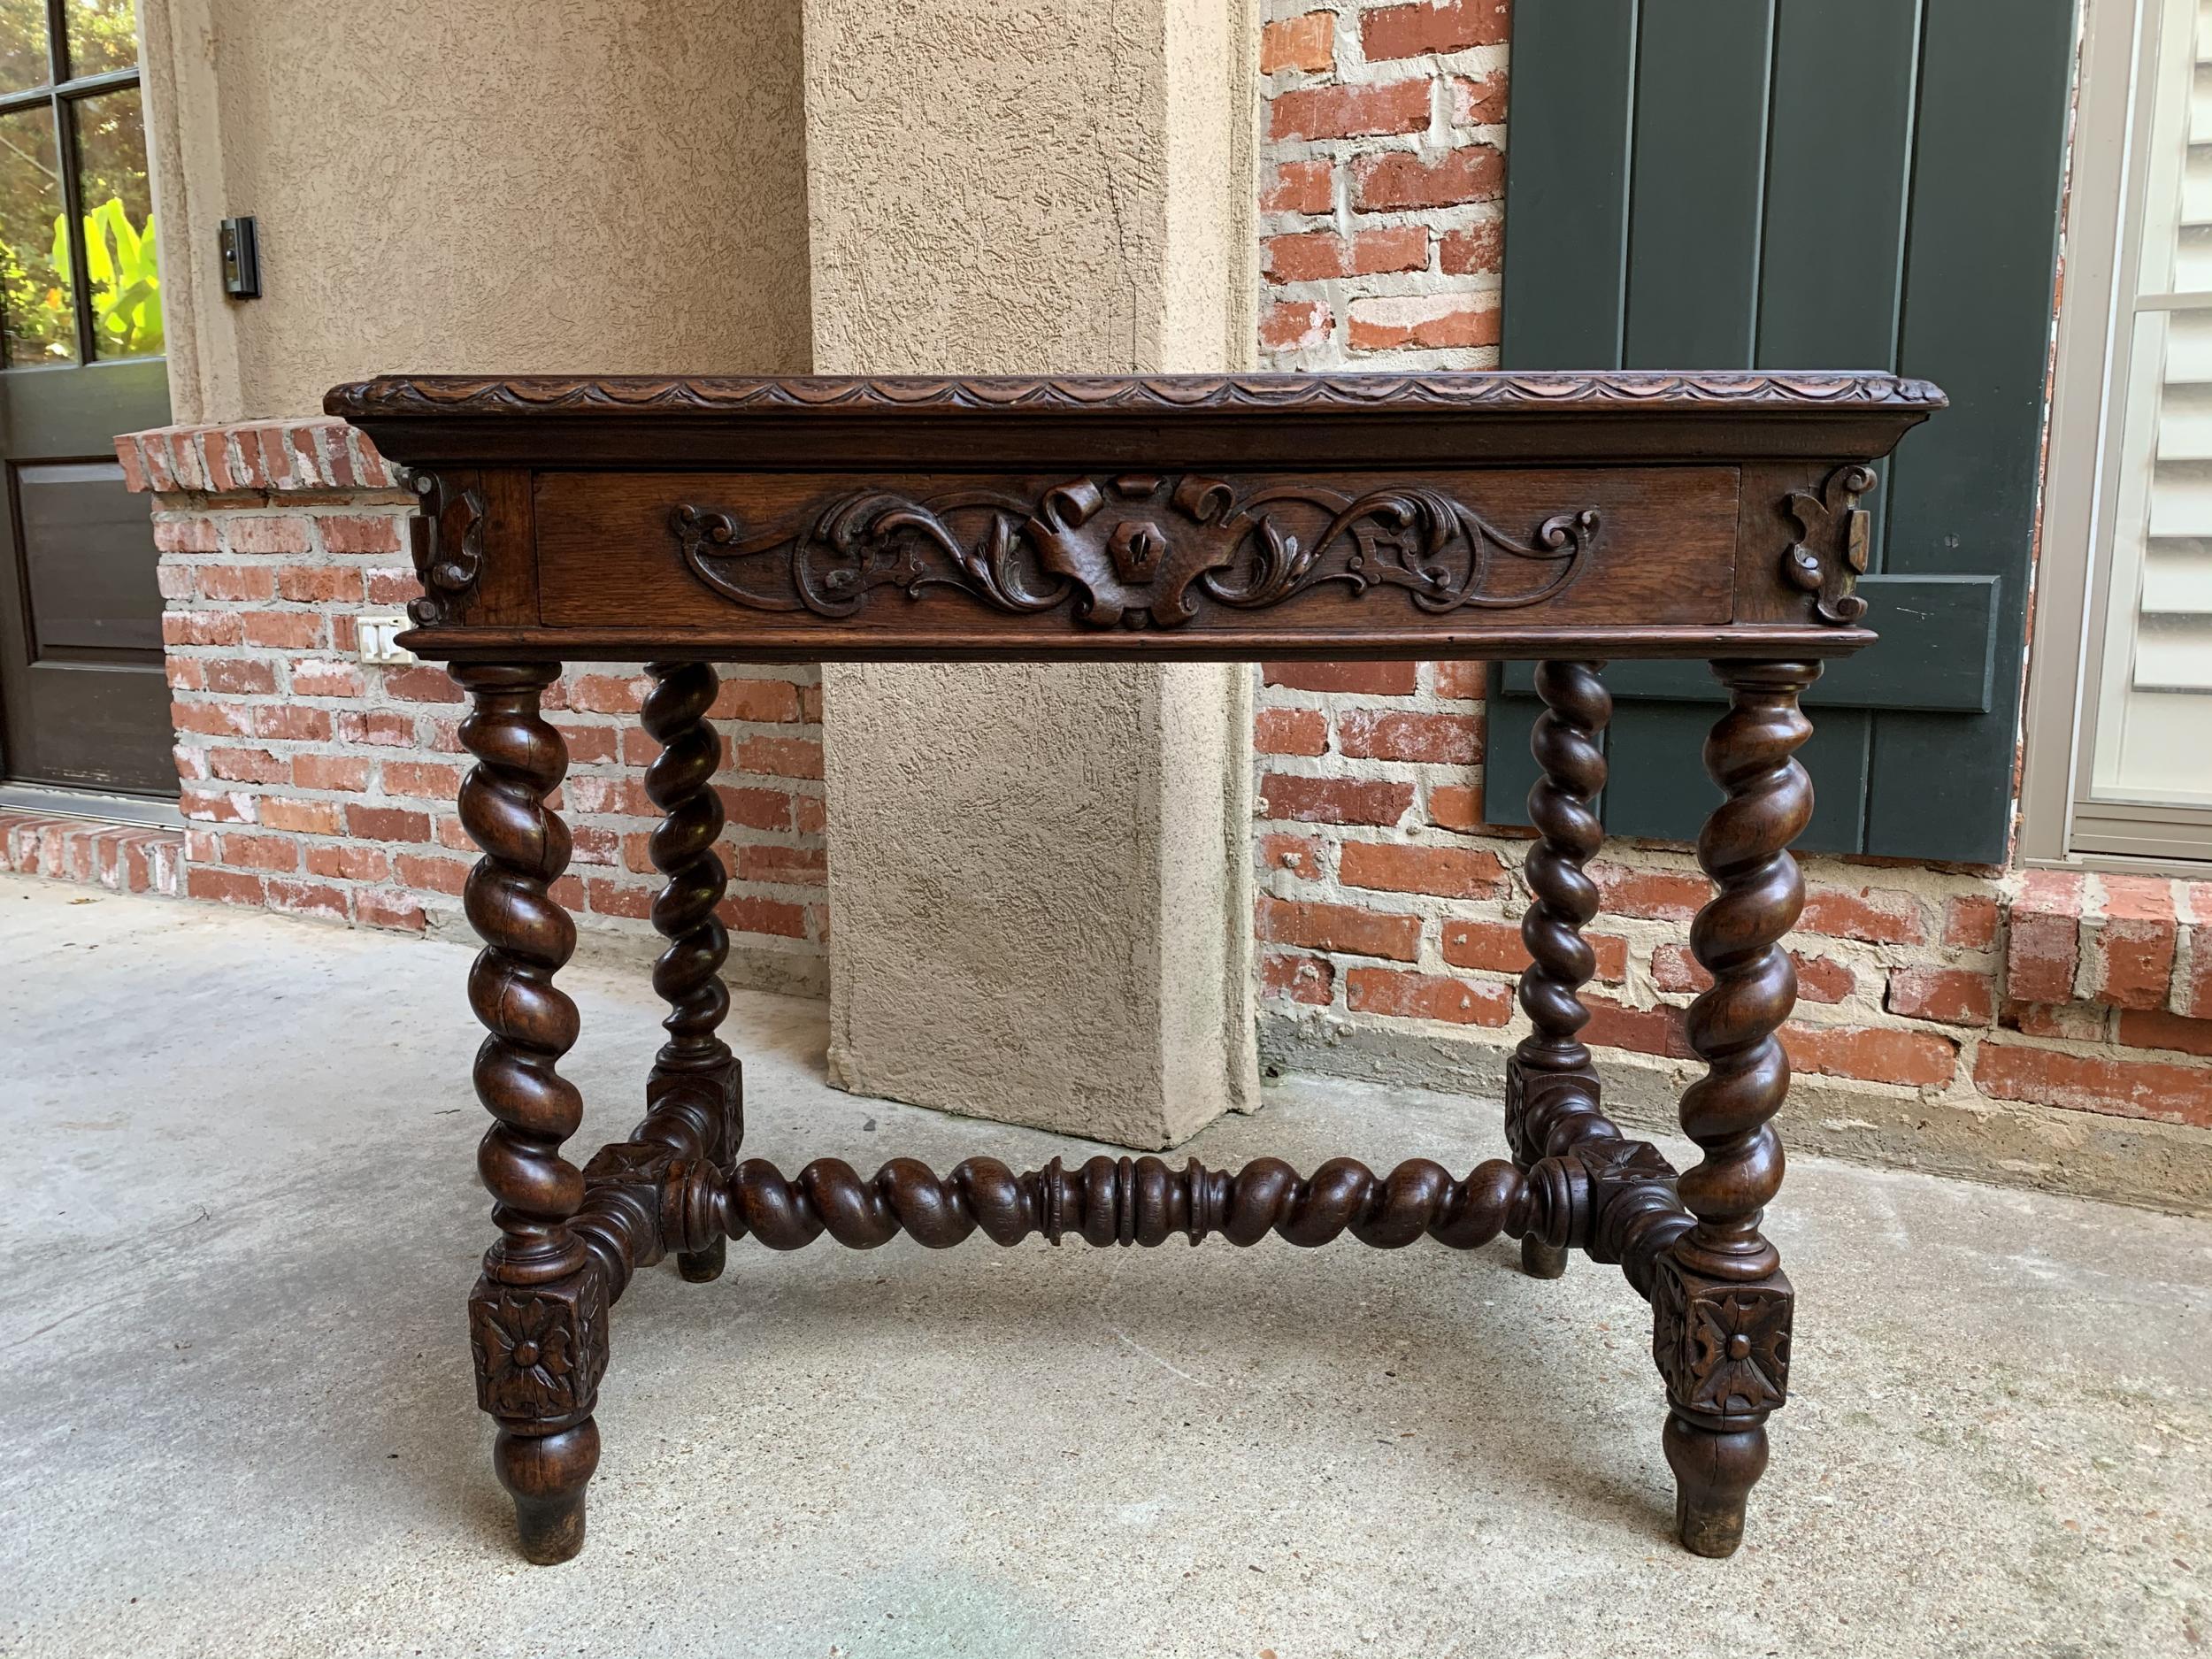 19th century French carved oak sofa table writing desk barley twist Louis XIII style

~ Direct from France
~ Beautiful French writing desk or sofa table with elegant features!
~ Lovely barely twist legs as well as barley twist stretcher and